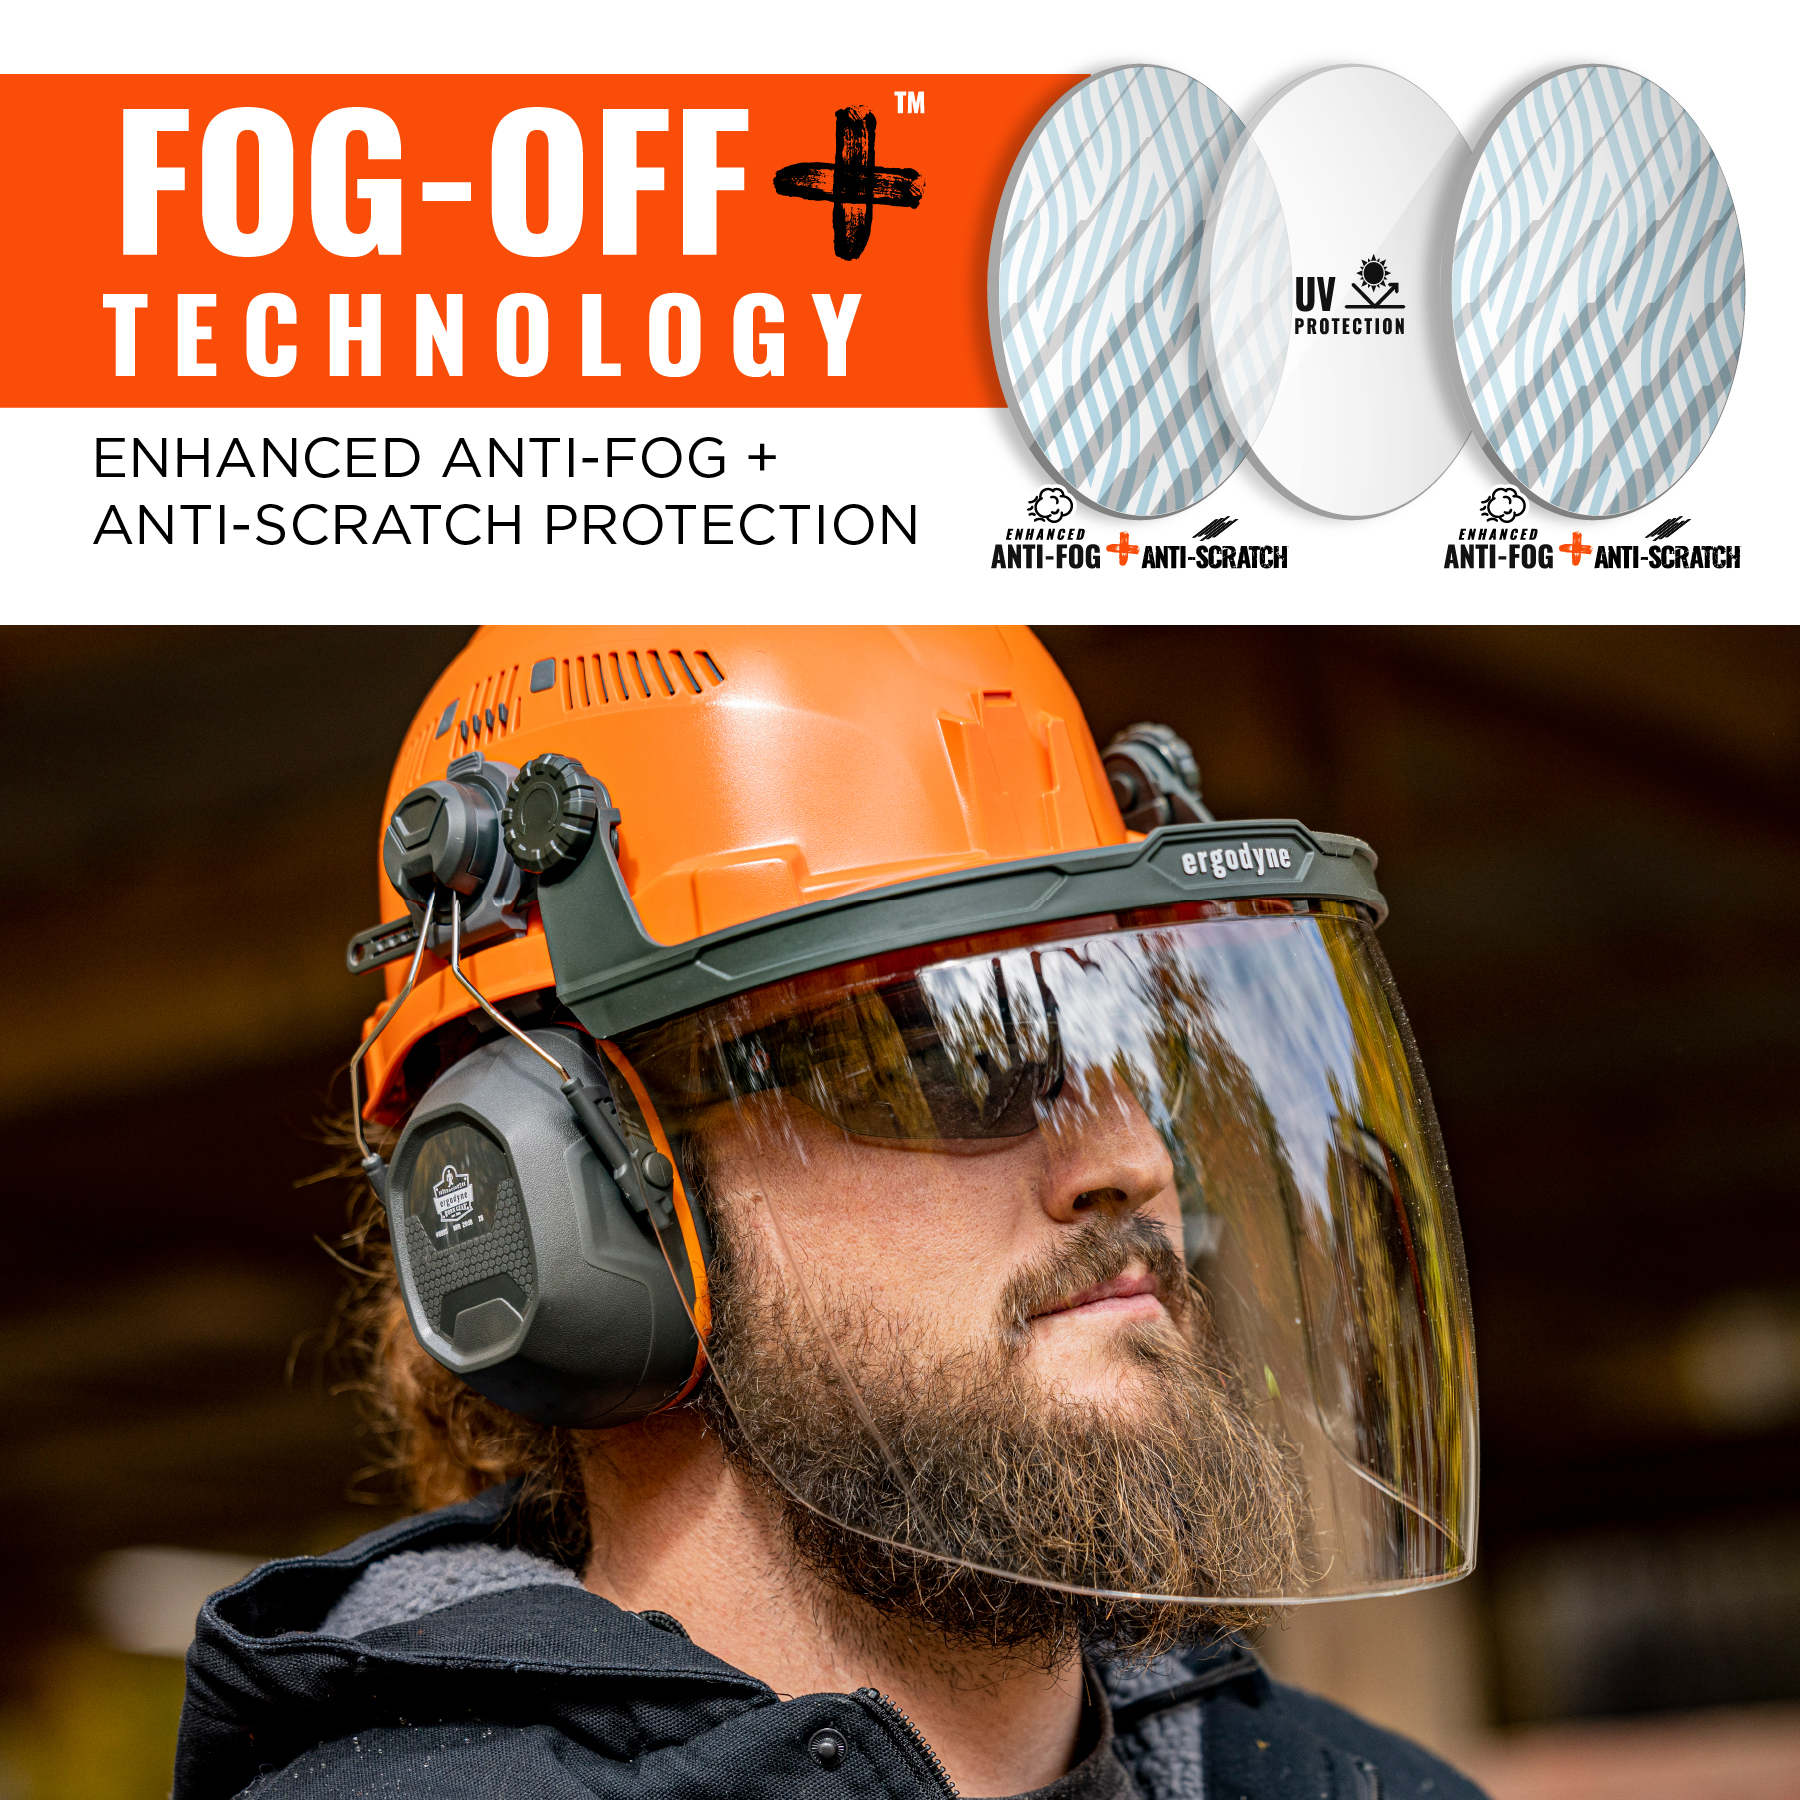 https://www.ergodyne.com/sites/default/files/product-images/60243-8994-anti-scratch-and-anti-fog-hard-hat-face-shield-with-adaptor-gray-fog-off-plus-technology.jpg